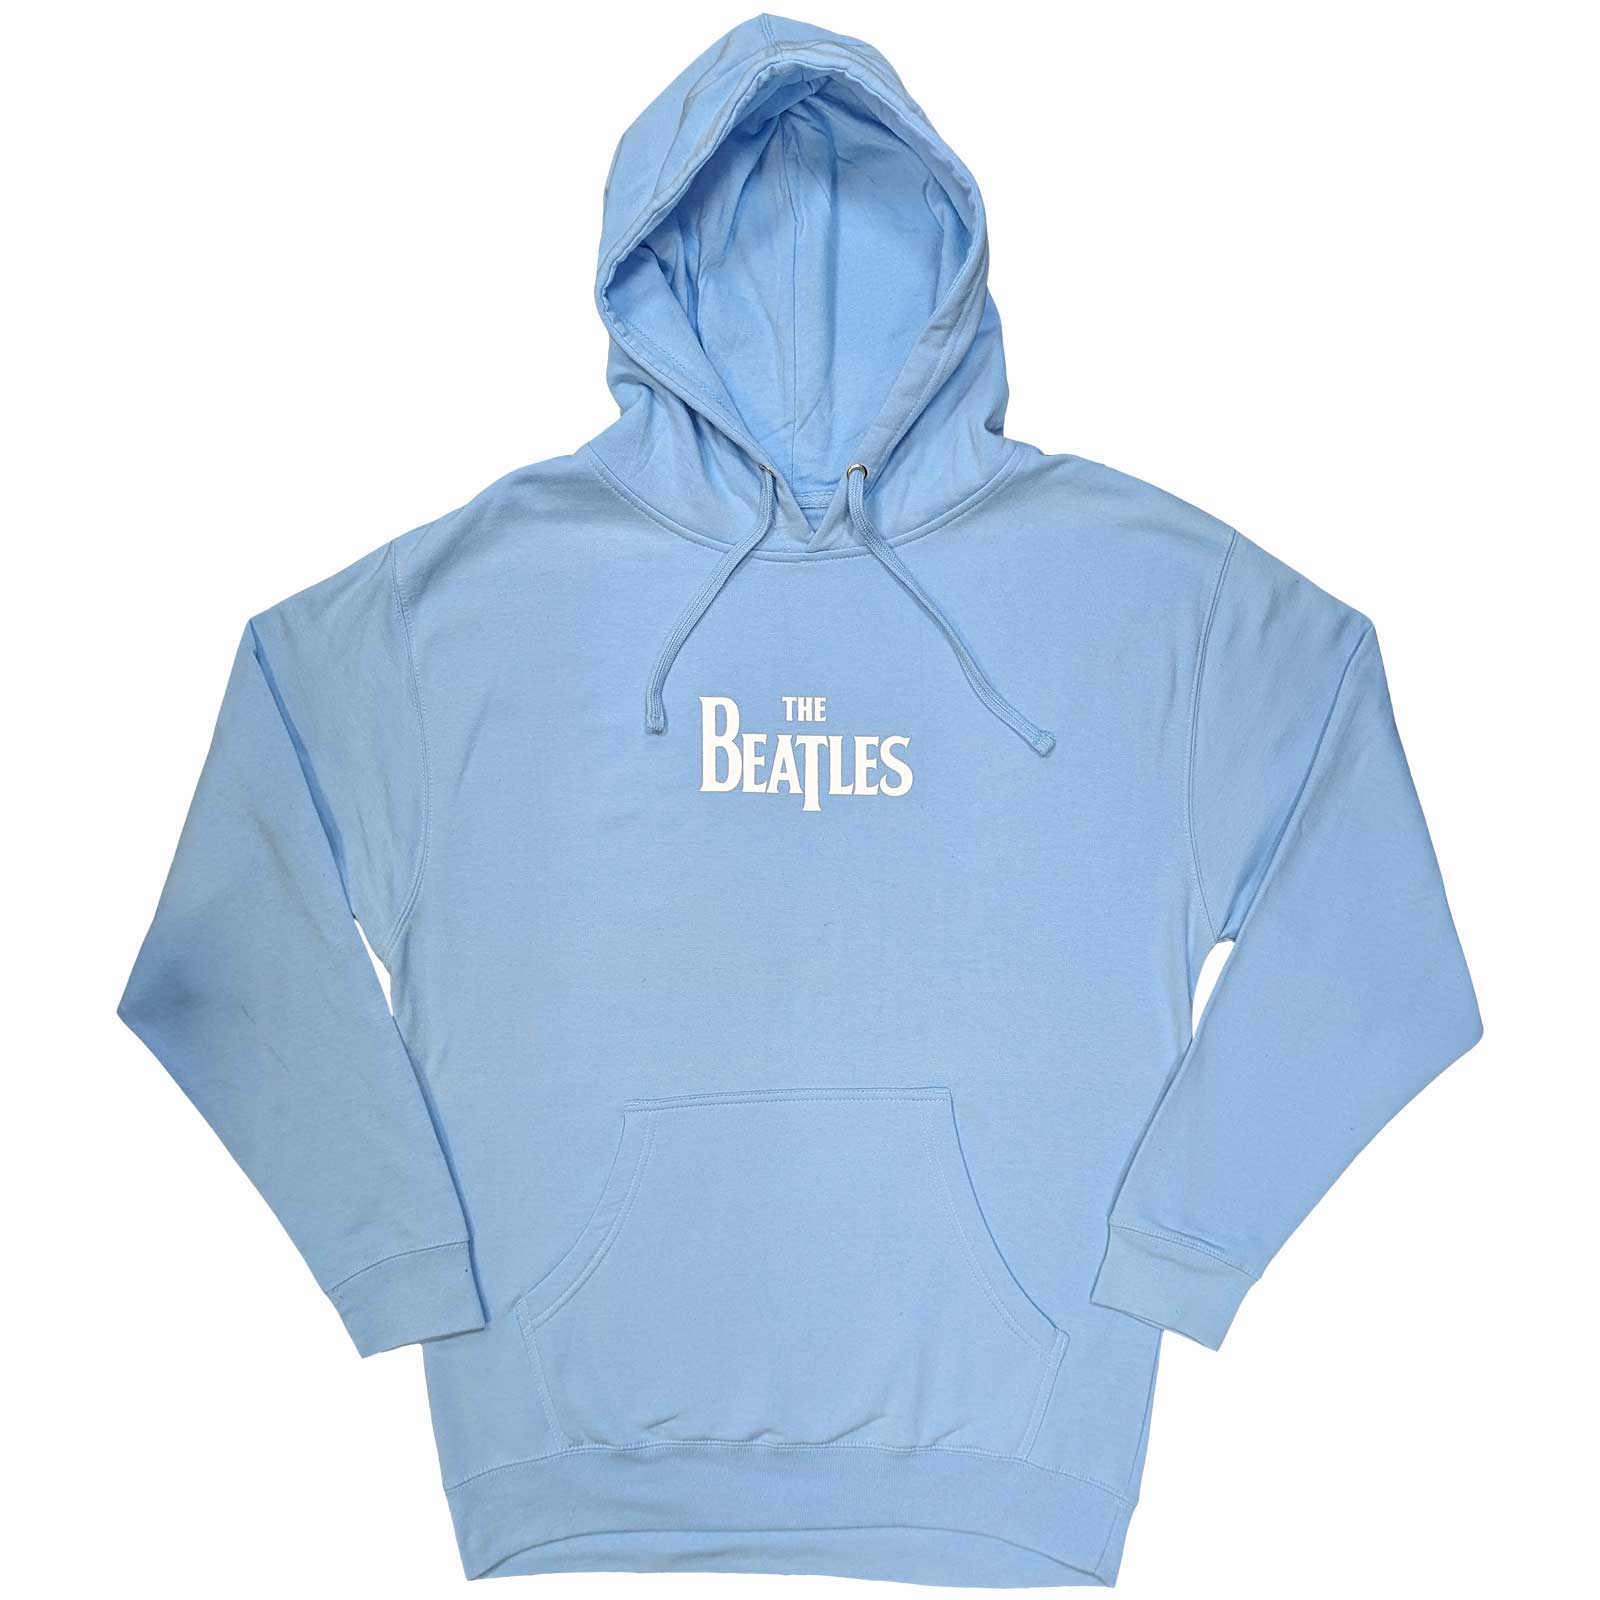 The Beatles Unisex Hoodie – All You Need is Love (Rückendruck) – Offizielles Lizenzdesign